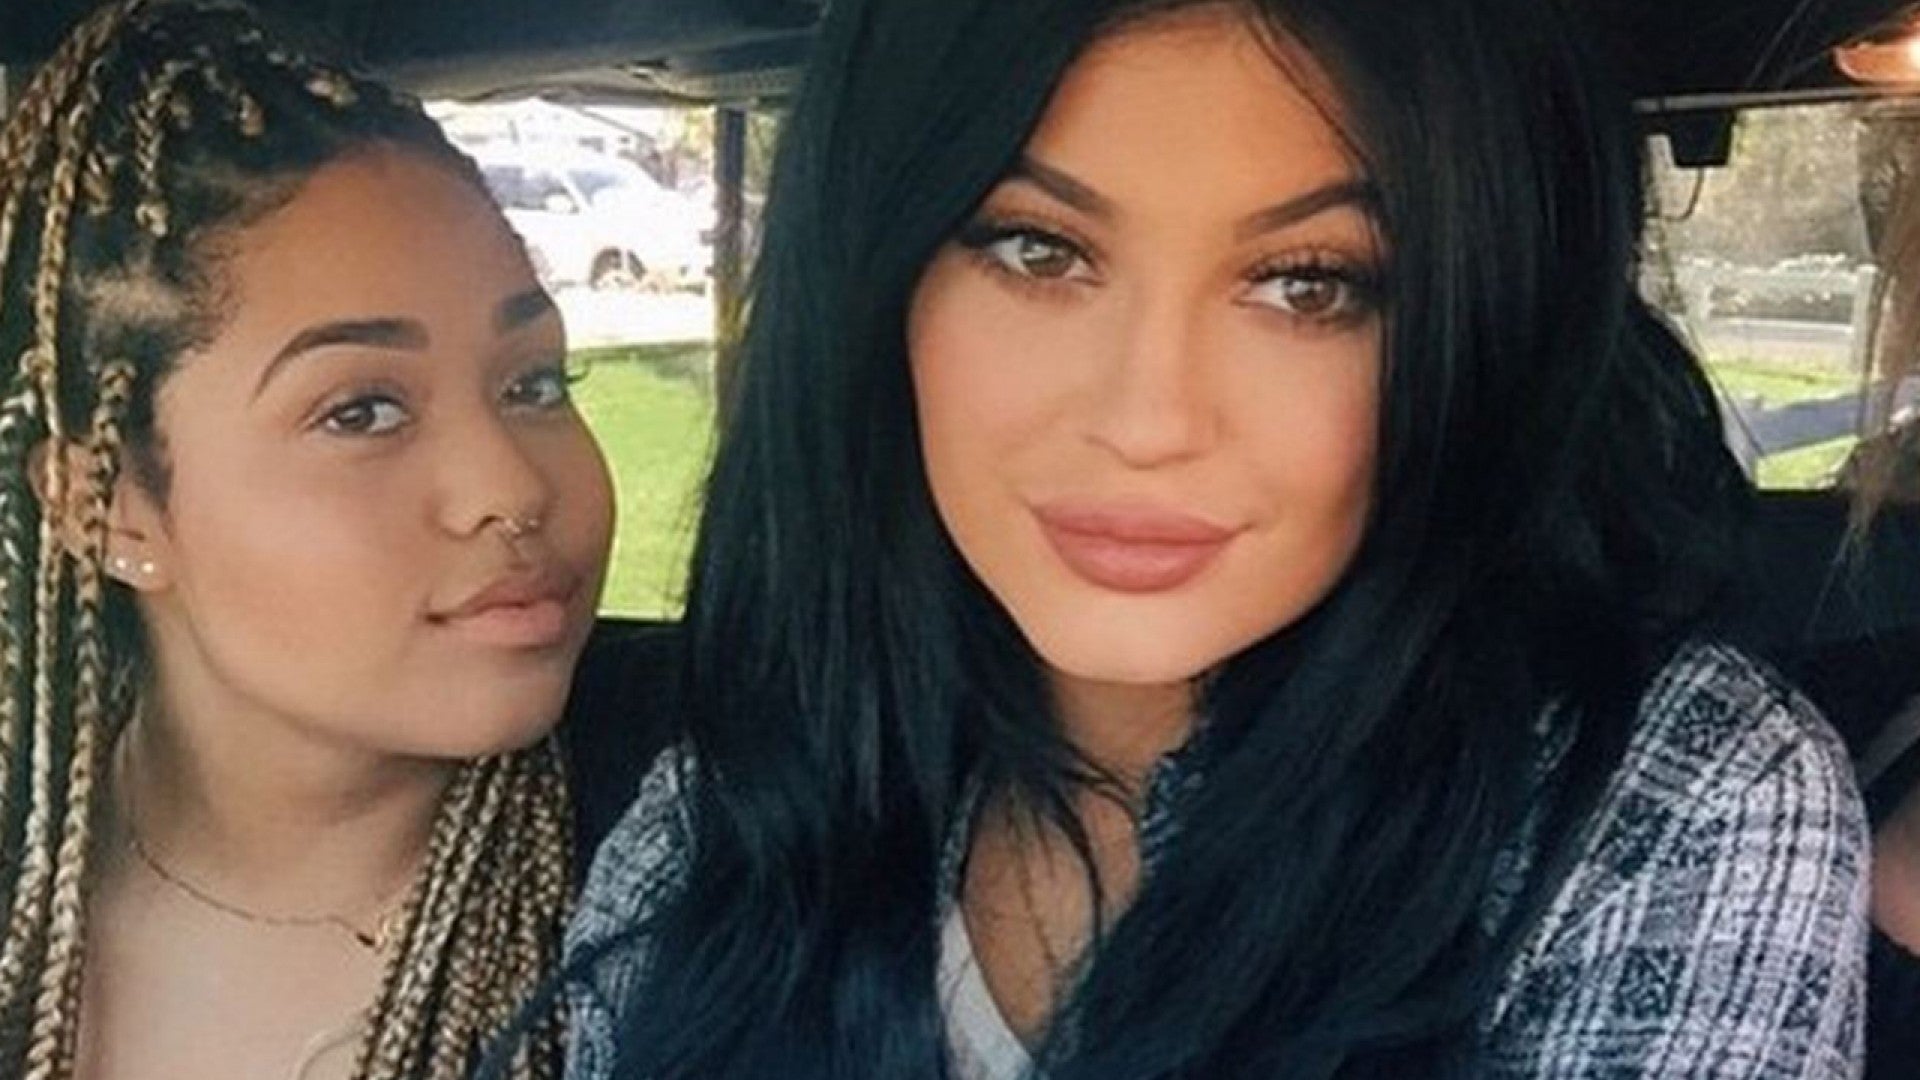 Kylie Jenner Gives Best Friend the Best Birthday Gift Ever: A New Car! | Tonight